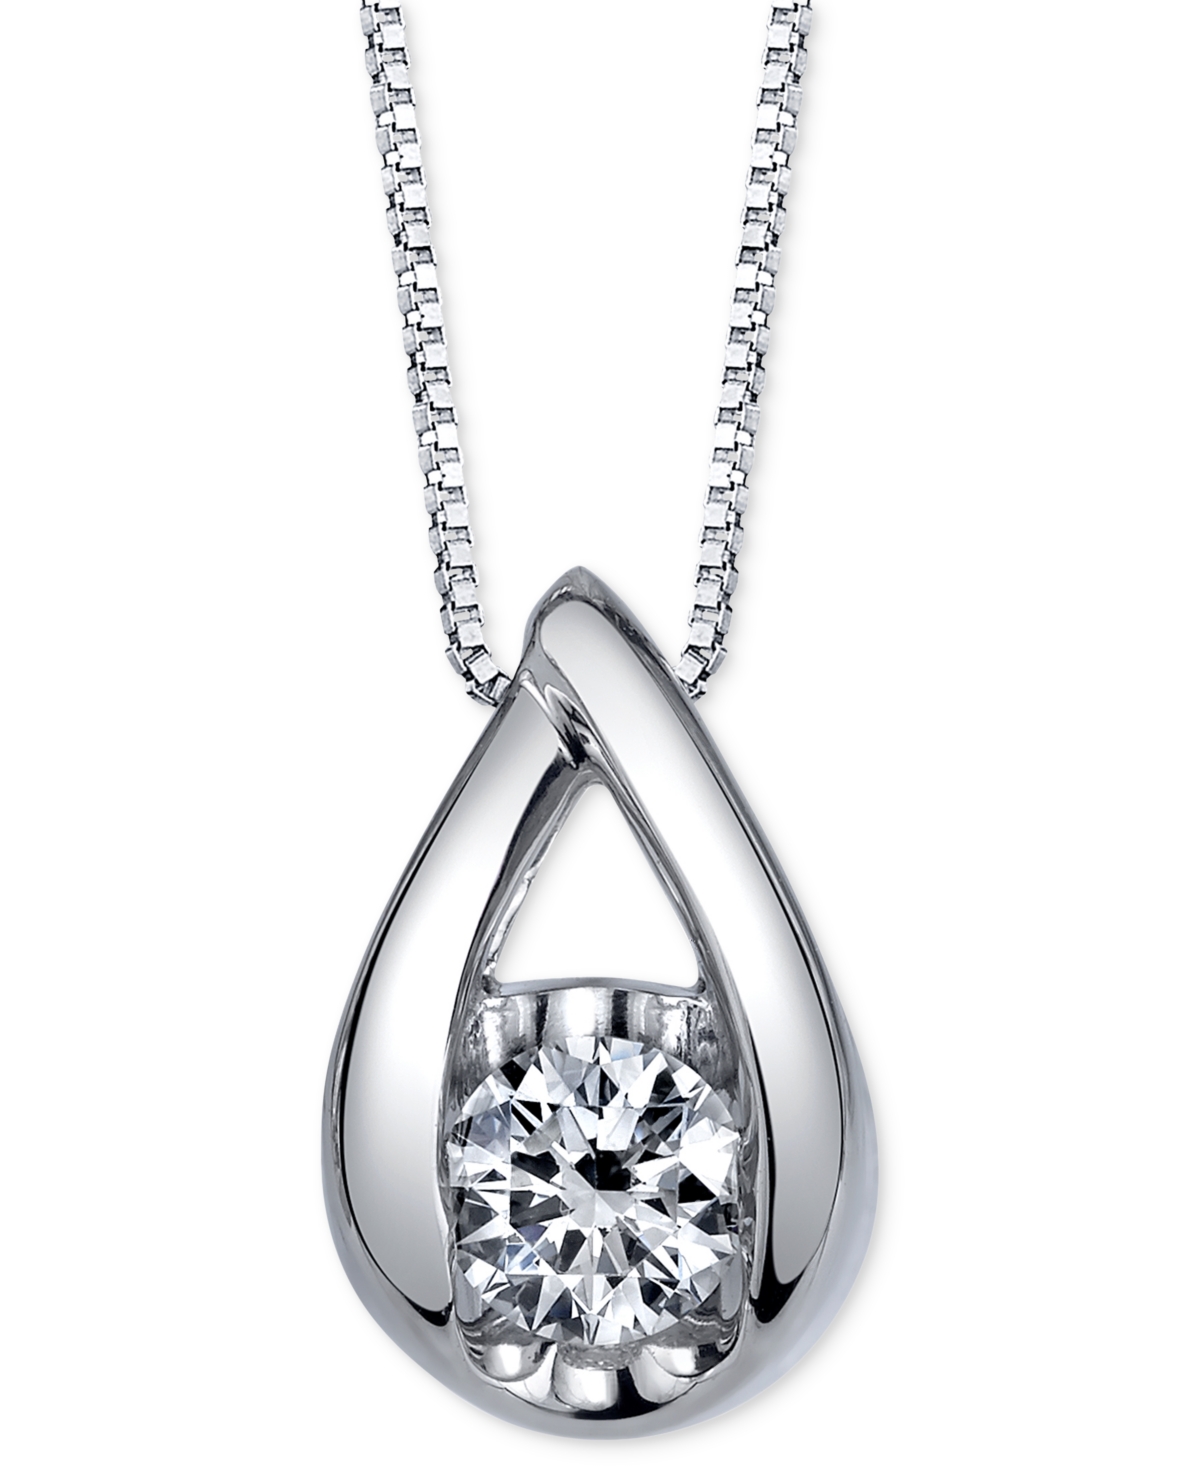 Diamond Teardrop Pendant Necklace (1/5 ct. t.w.) in 14k White Gold or Rose Gold - White Gold